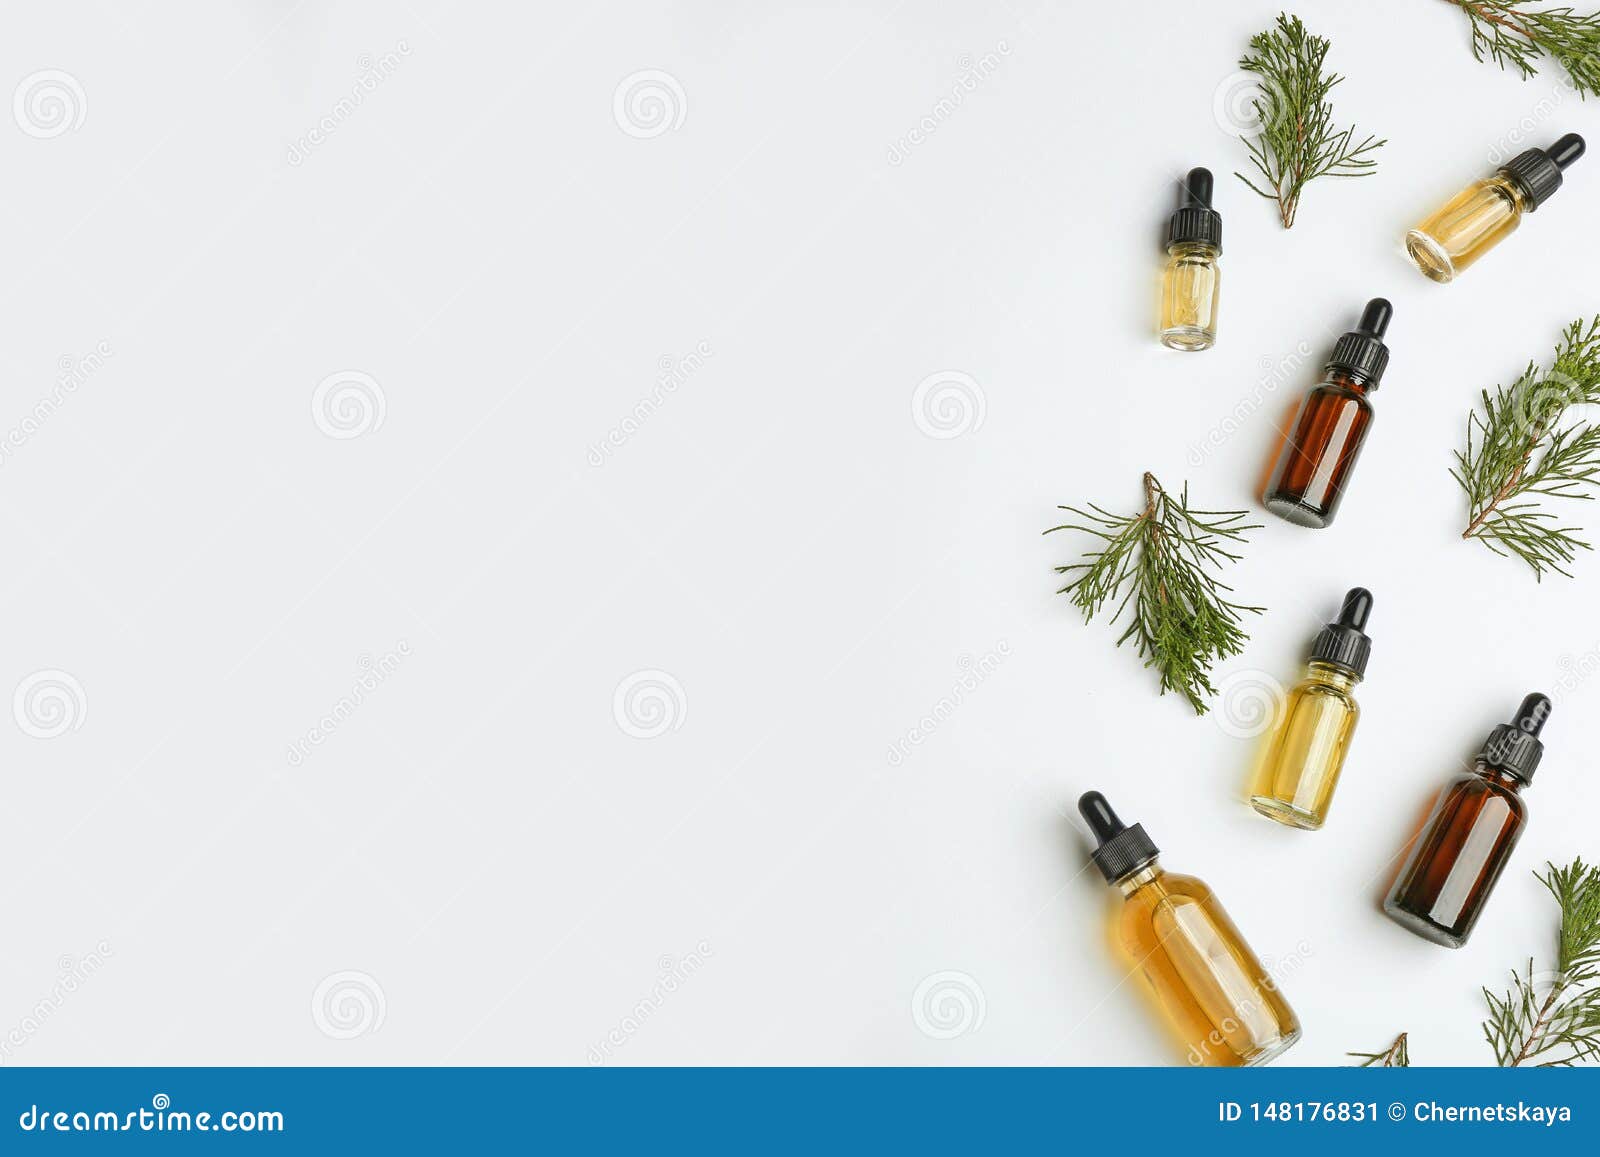 little bottles with essential oils among pine branches on white background, flat lay.